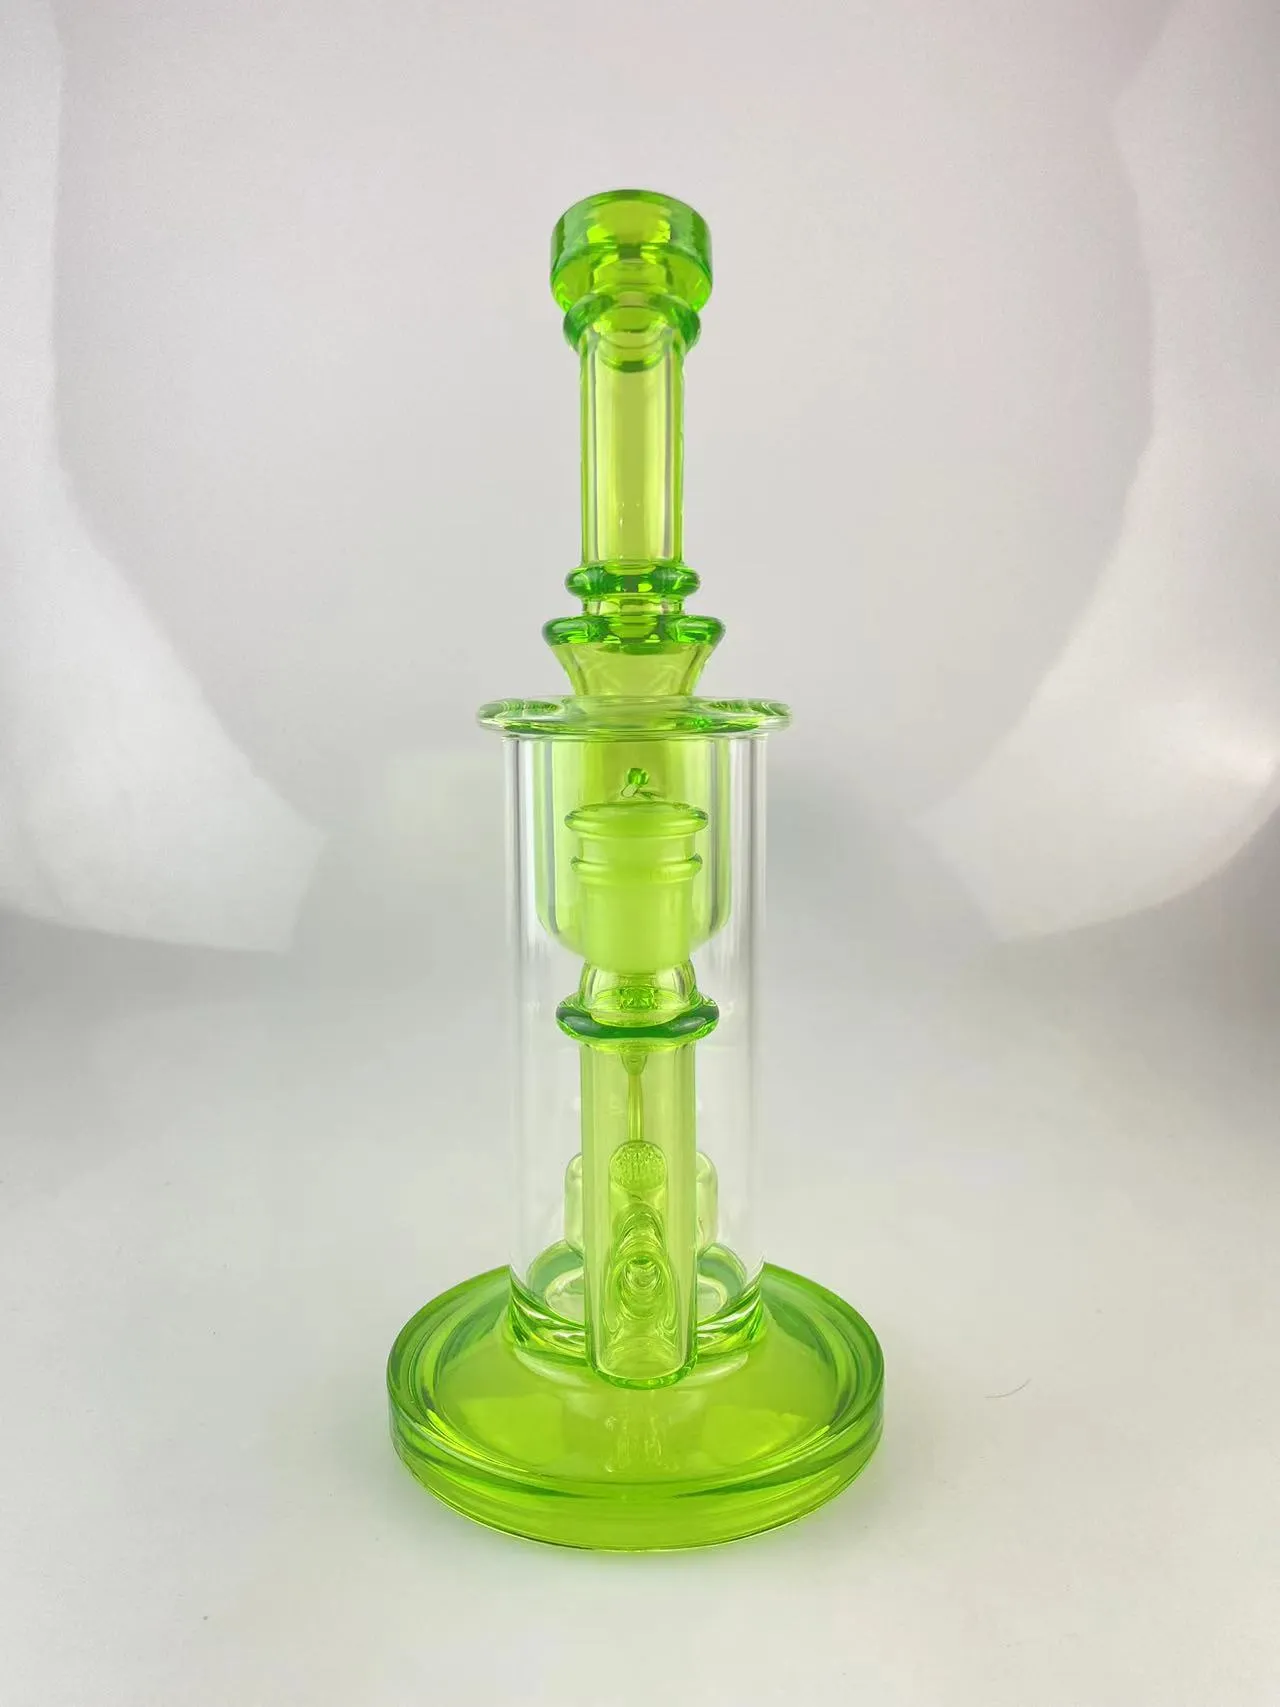 SPECIAL PIPES rig 14mm joint full colored with fluorent green and purole cfl Each type only one in stock now . First come first serve